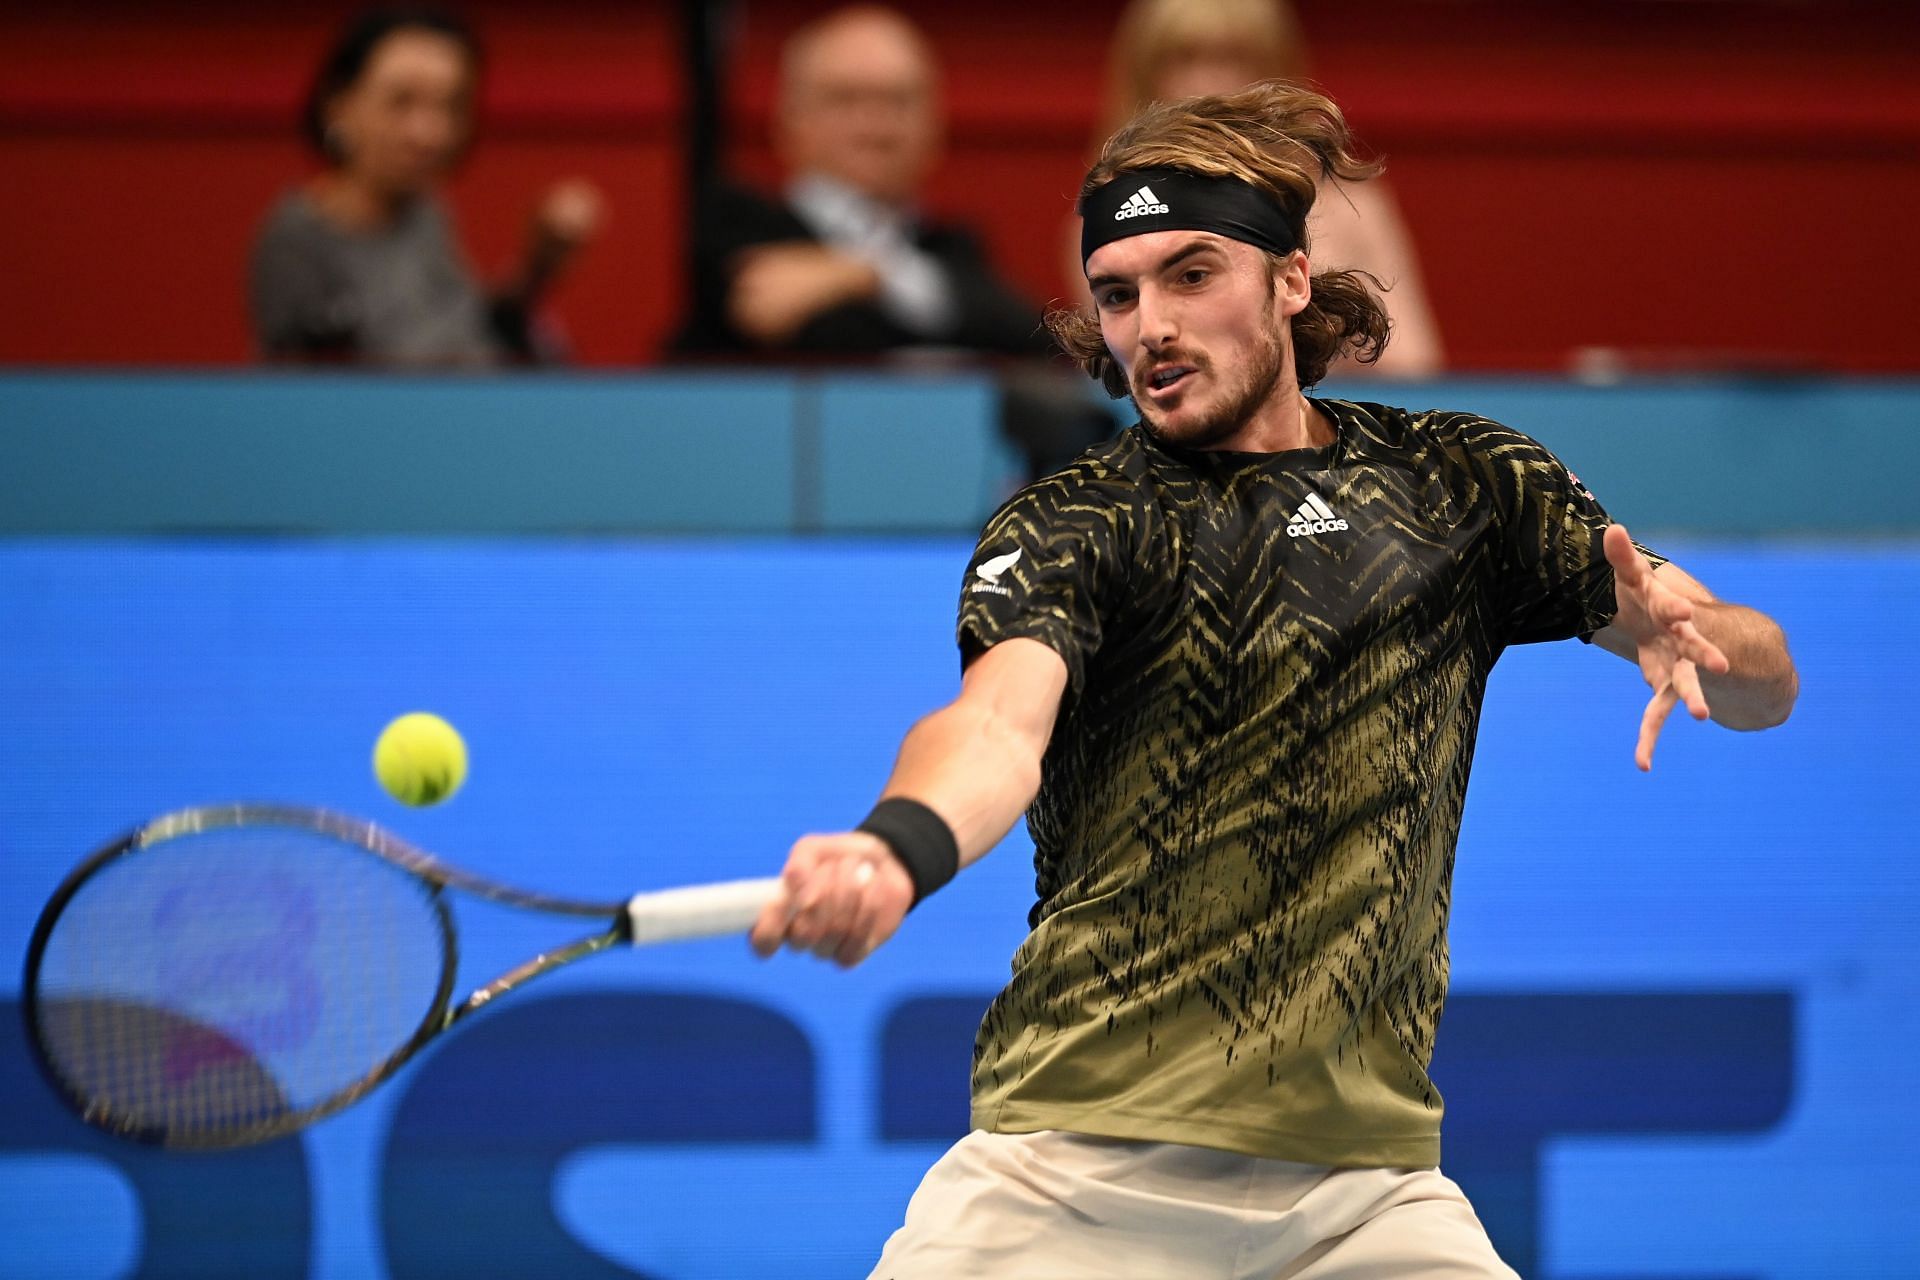 Tsitsipas is one of the players to watch out for this year